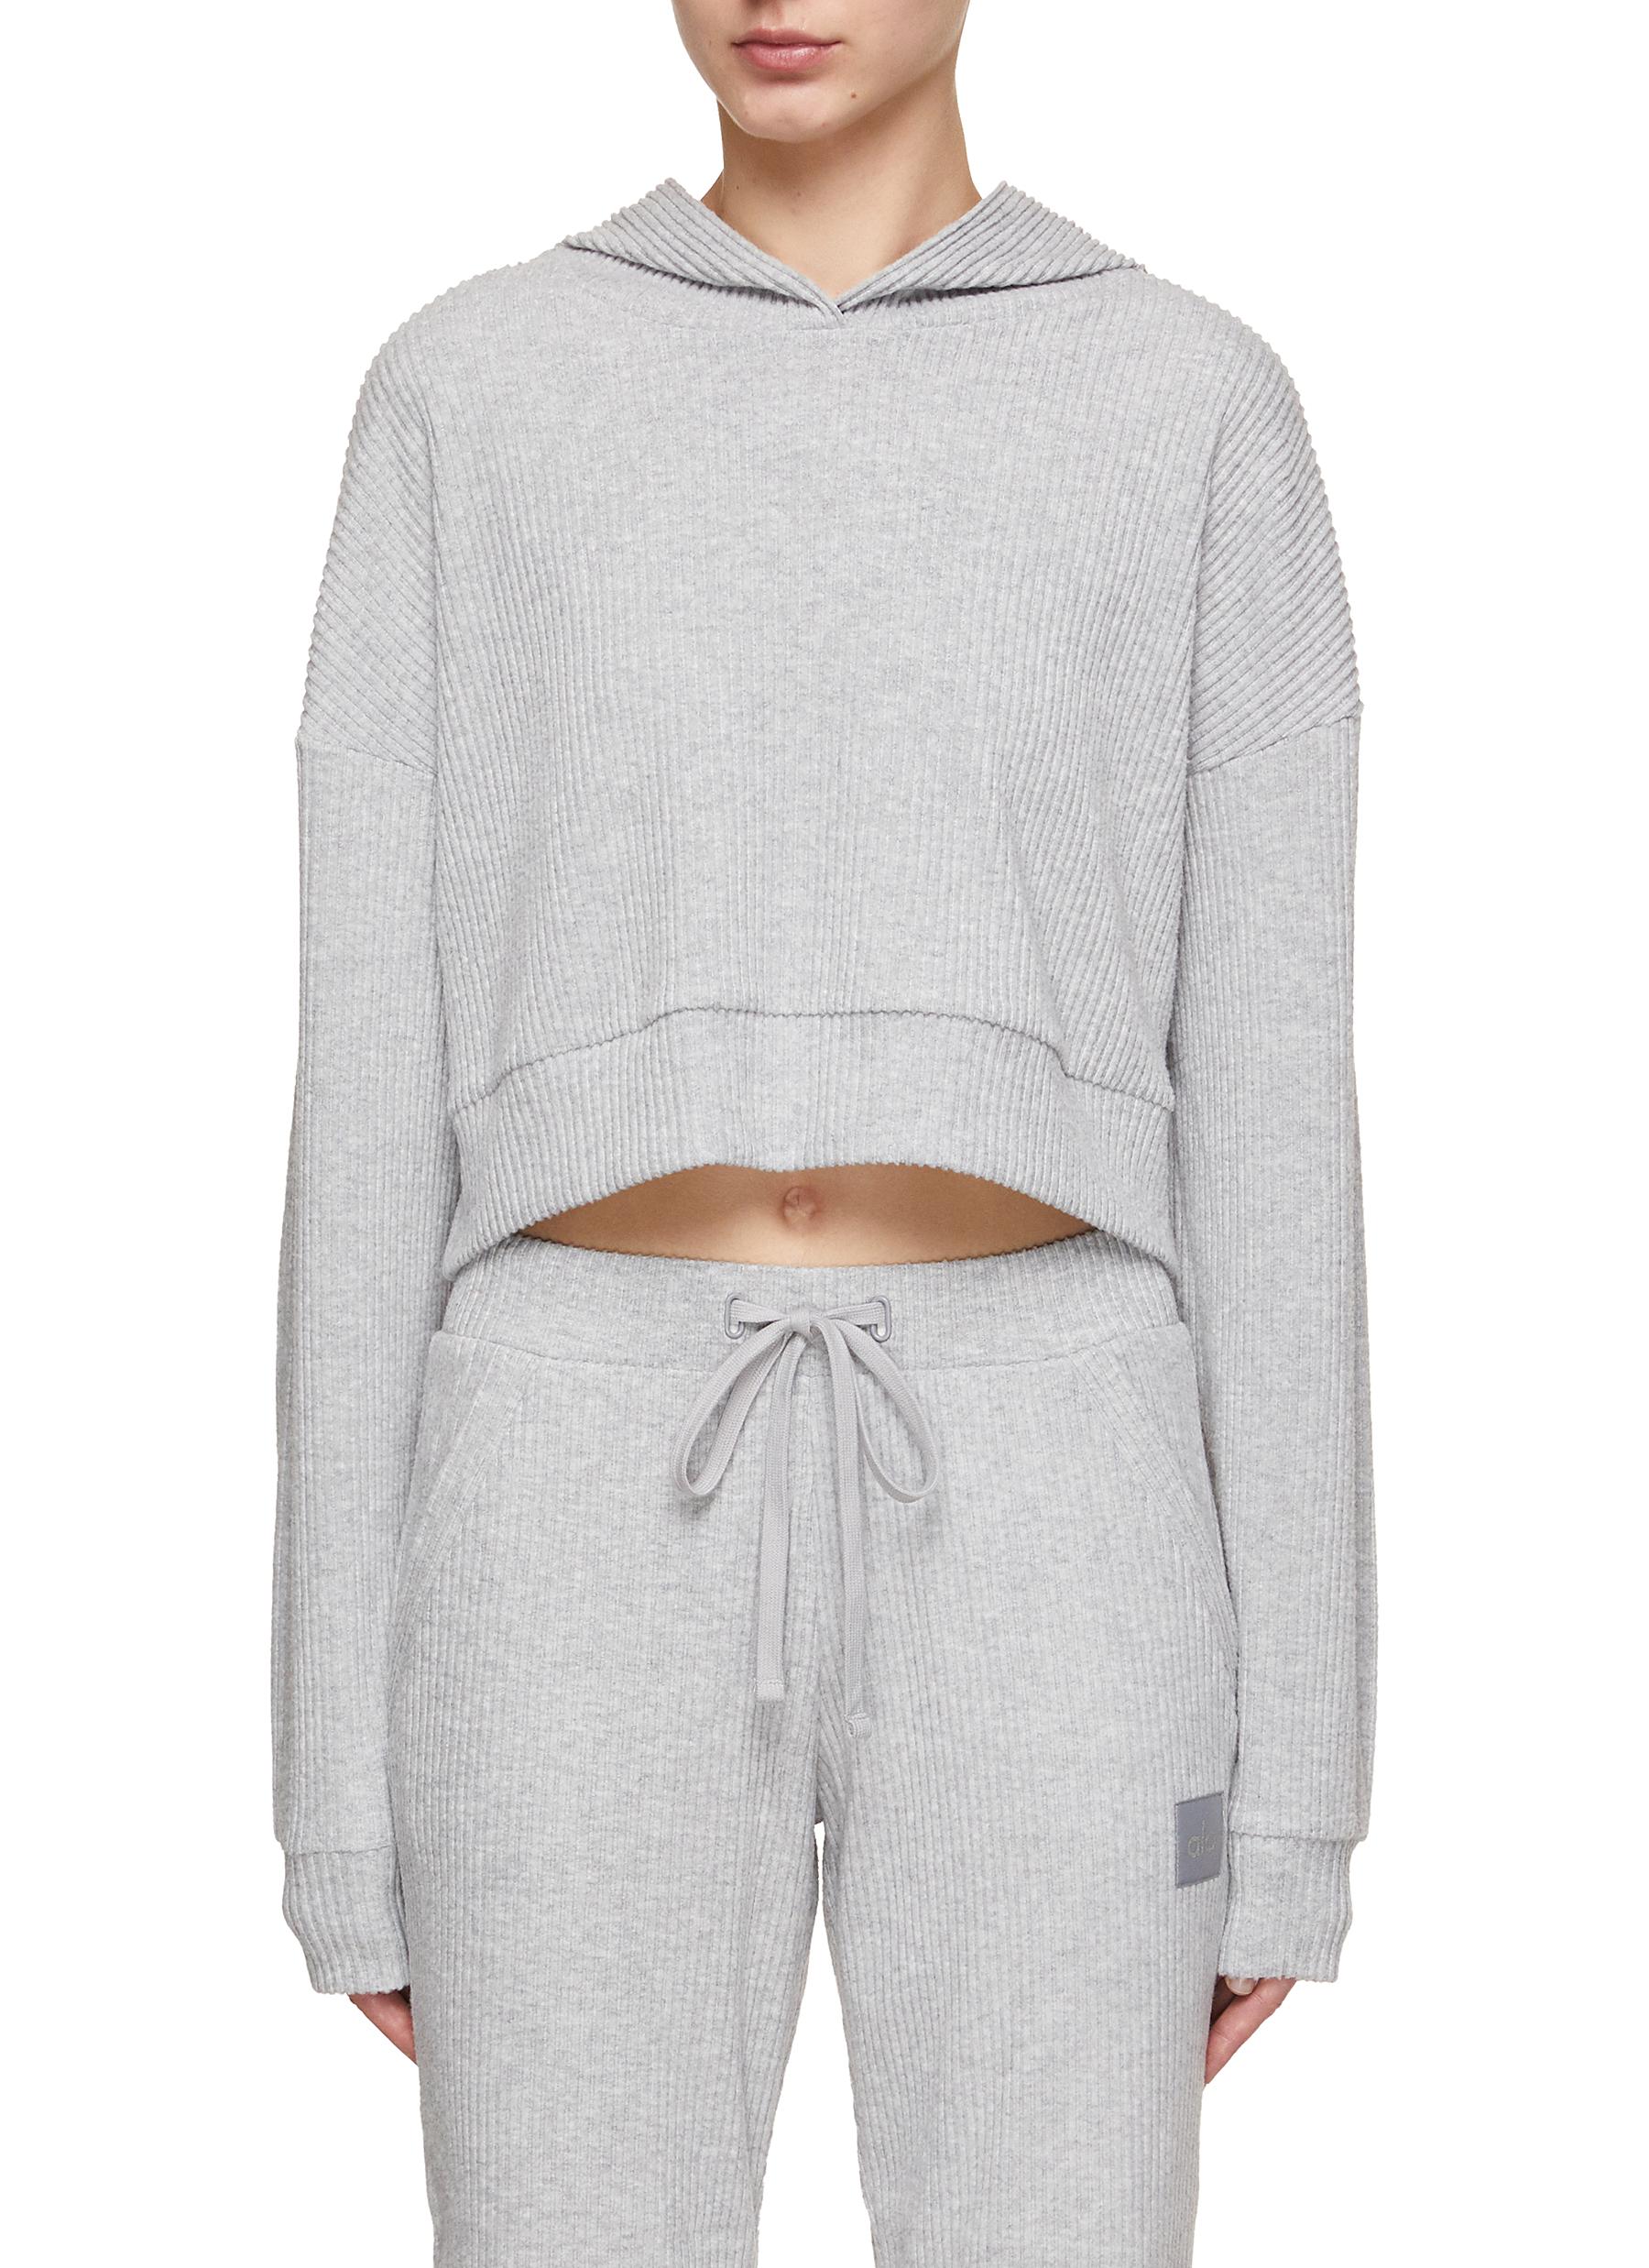 ALO YOGA, Muse Cropped Hoodie, Women